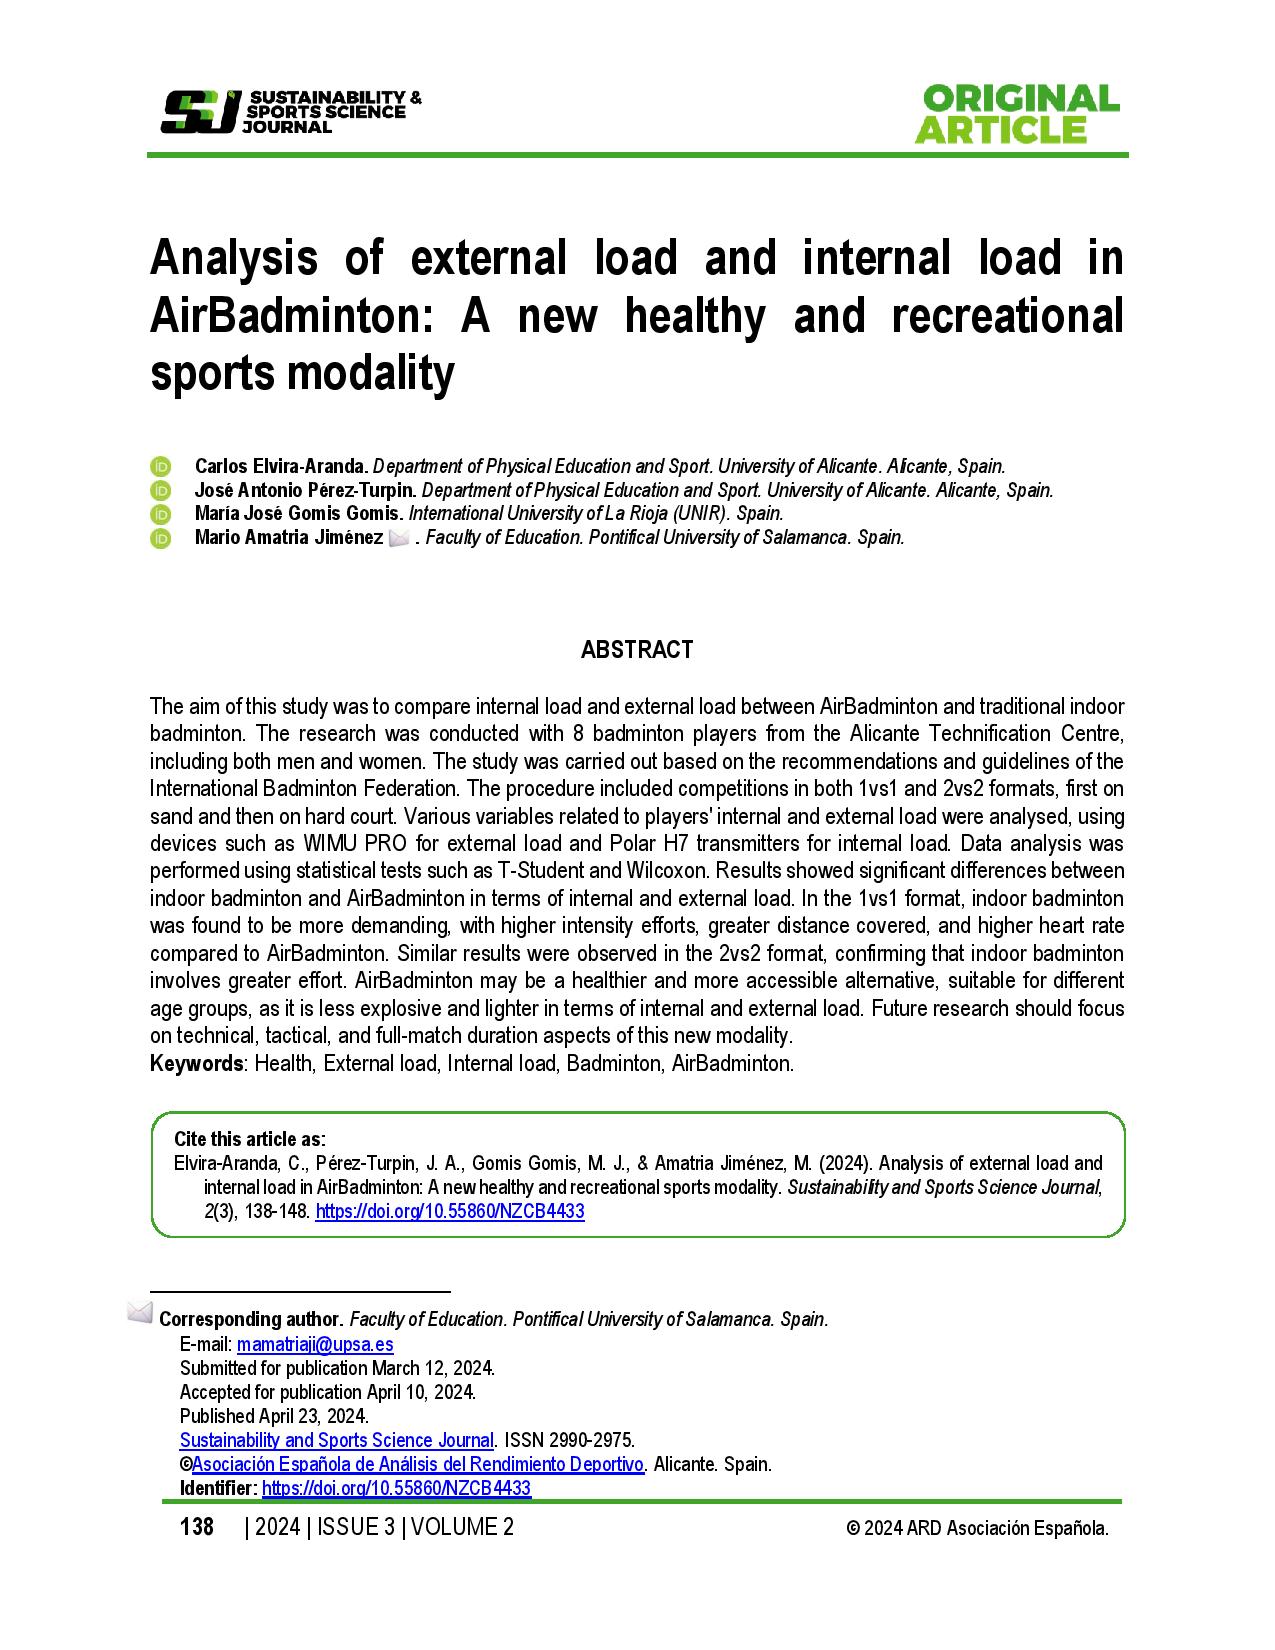 Analysis of external load and internal load in AirBadminton: A new healthy and recreational sports modality